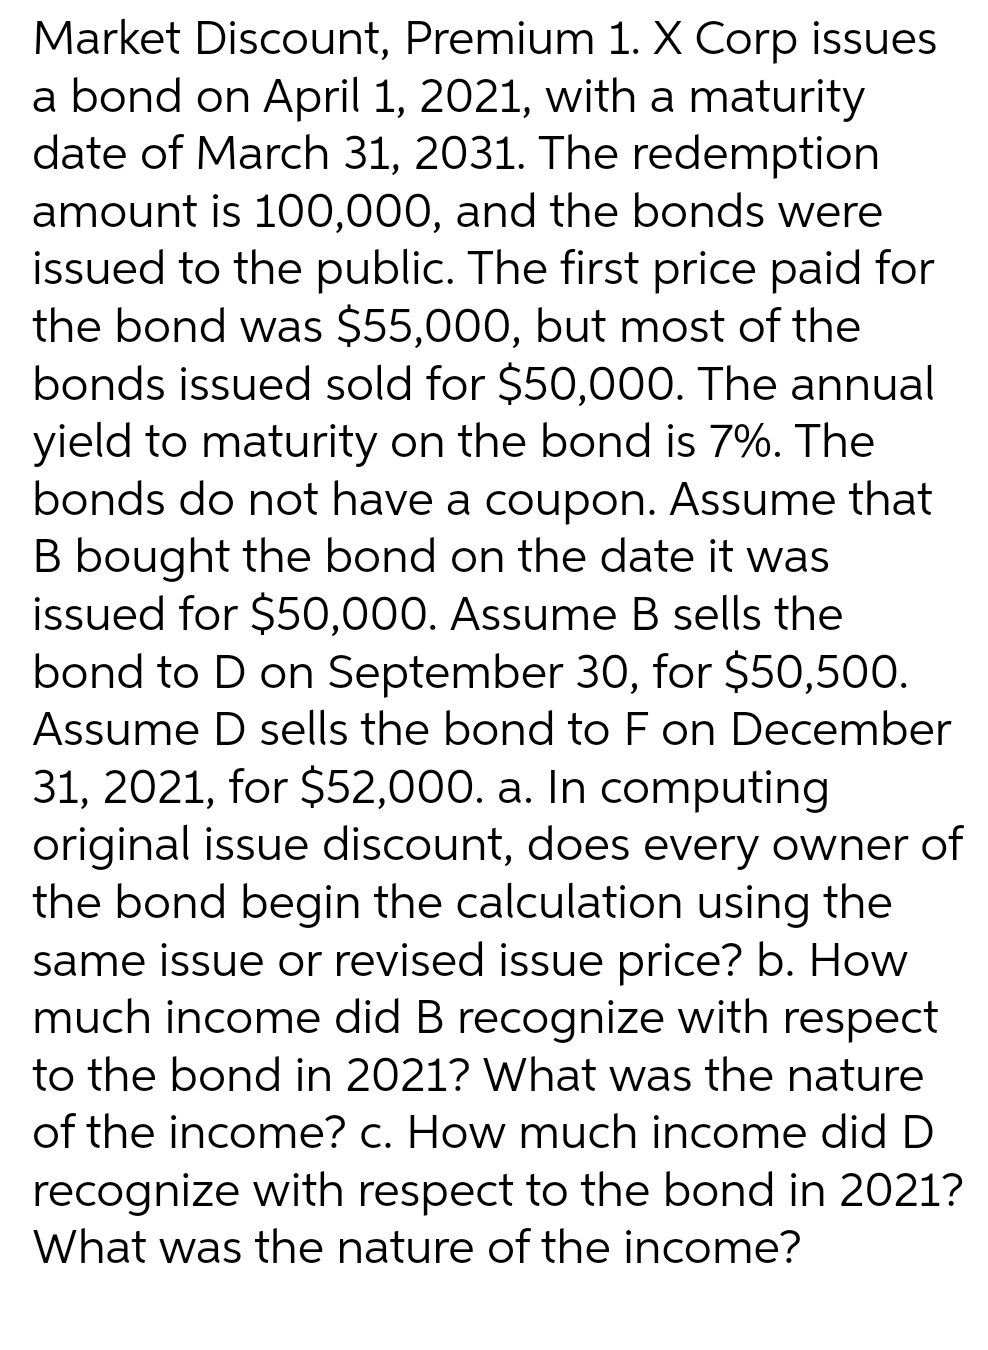 Market Discount, Premium 1. X Corp issues
a bond on April 1, 2021, with a maturity
date of March 31, 2031. The redemption
amount is 100,000, and the bonds were
issued to the public. The first price paid for
the bond was $55,000, but most of the
bonds issued sold for $50,000. The annual
yield to maturity on the bond is 7%. The
bonds do not have a coupon. Assume that
B bought the bond on the date it was
issued for $50,000. Assume B sells the
bond to D on September 30, for $50,500.
Assume D sells the bond to F on December
31, 2021, for $52,000. a. In computing
original issue discount, does every owner of
the bond begin the calculation using the
same issue or revised issue price? b. How
much income did B recognize with respect
to the bond in 2021? What was the nature
of the income? c. How much income did D
recognize with respect to the bond in 2021?
What was the nature of the income?